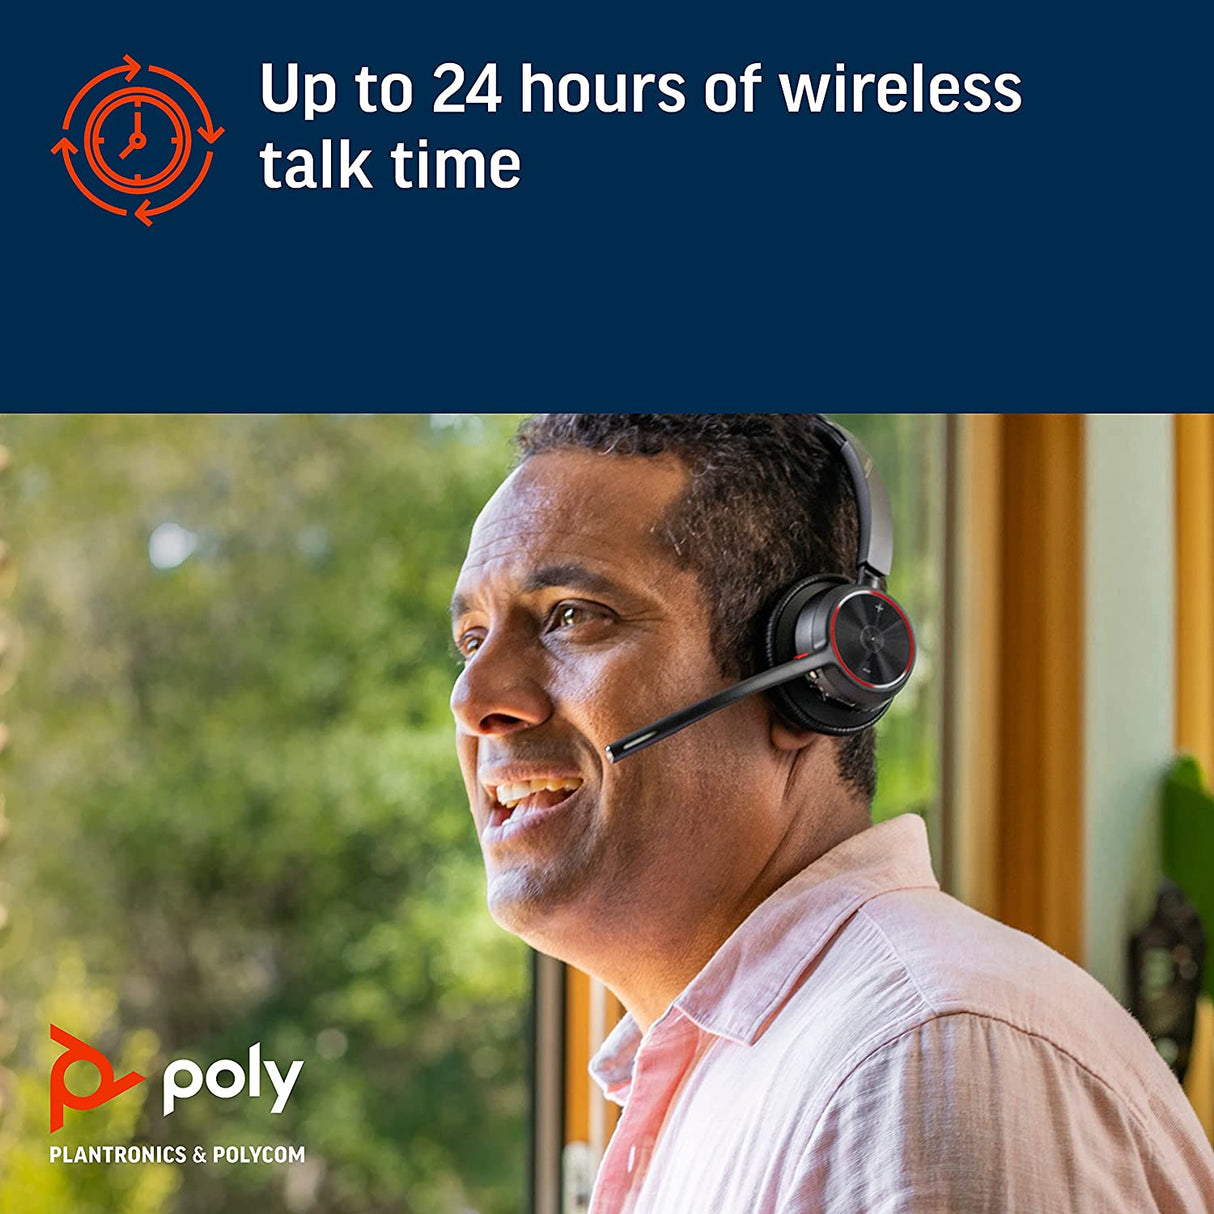 Poly - Voyager 4320 UC Wireless Headset (Plantronics) - Headphones with Boom Mic - Connect to PC/Mac via USB-A Bluetooth Adapter, Cell Phone via Bluetooth - Works with Teams, Zoom &amp; More Headset USB-A